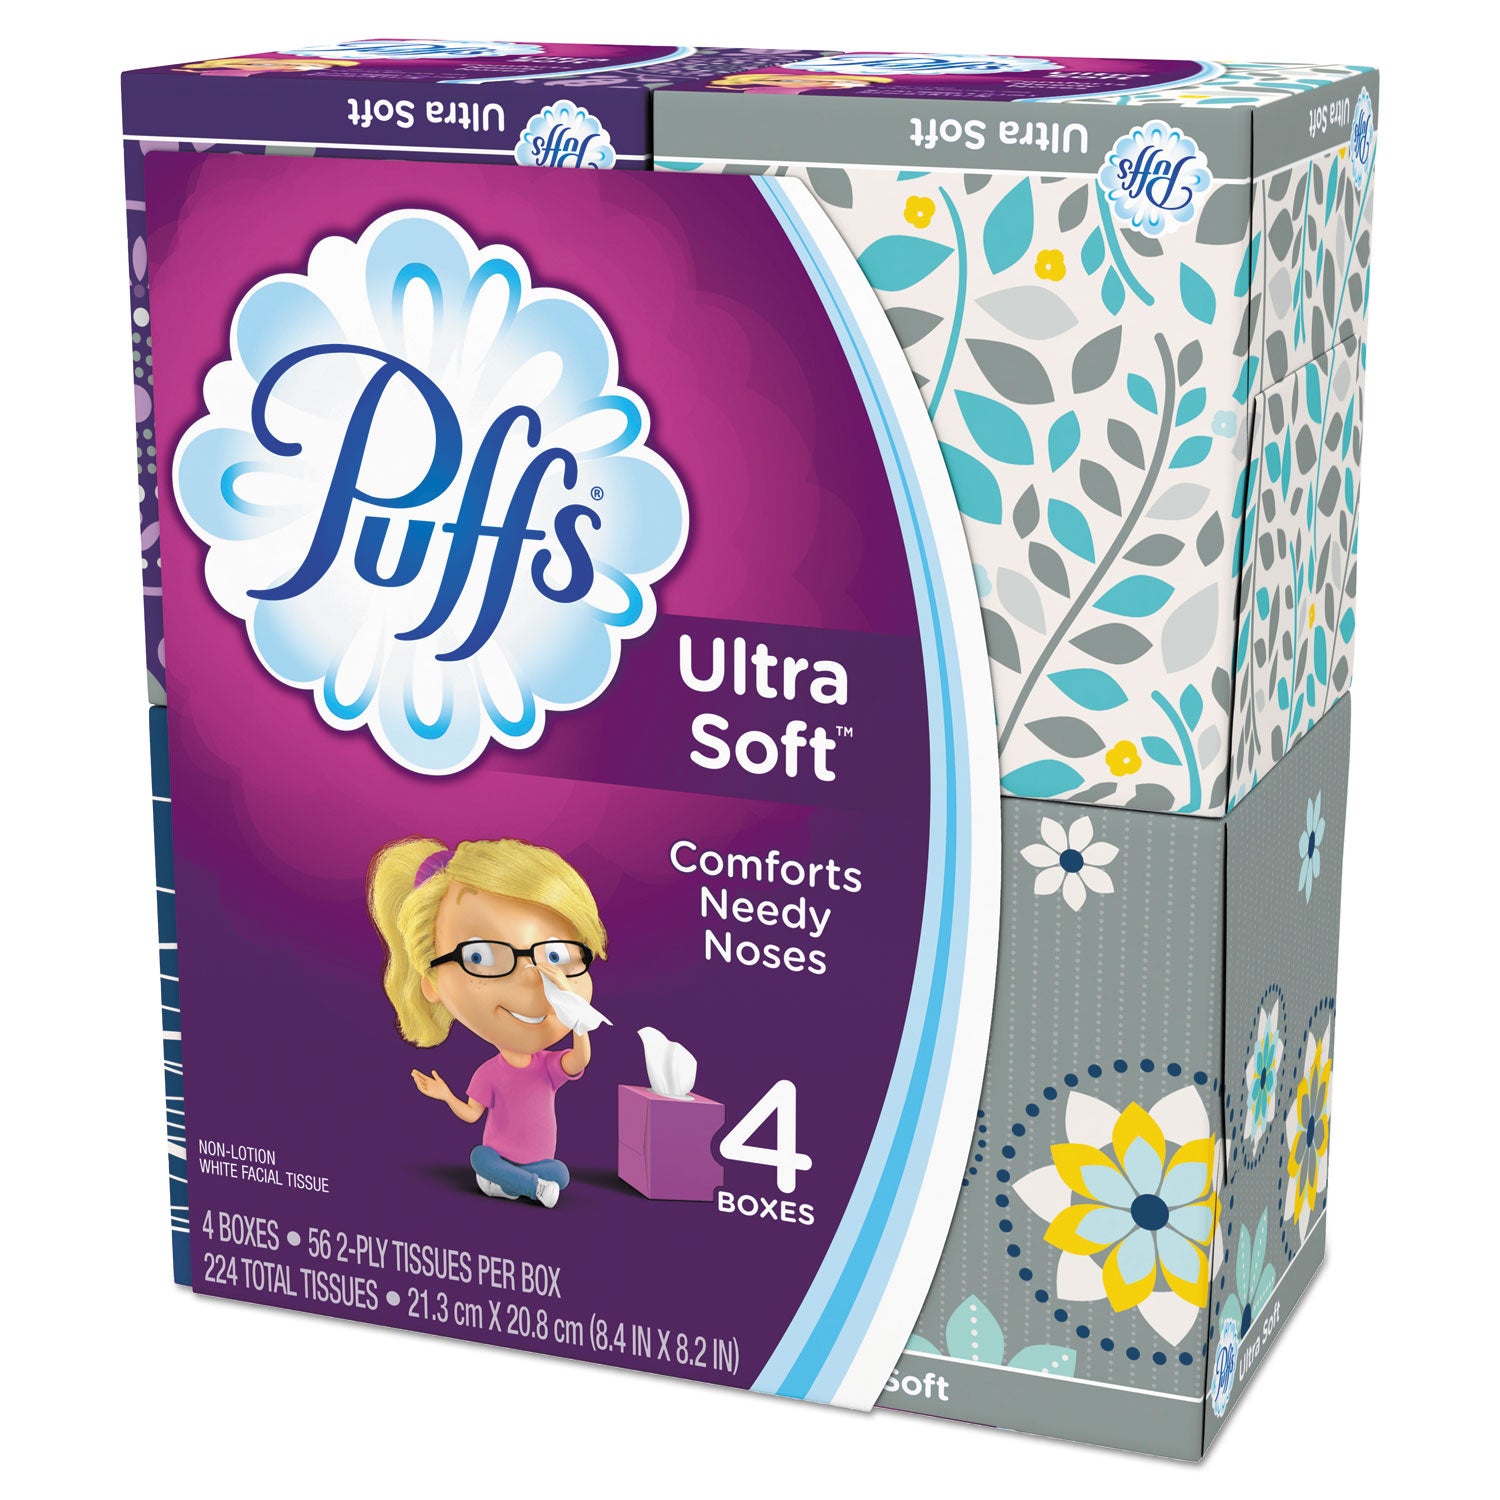 ultra-soft-facial-tissue-2-ply-white-56-sheets-box-4-boxes-pack-6-packs-carton_pgc35295 - 1